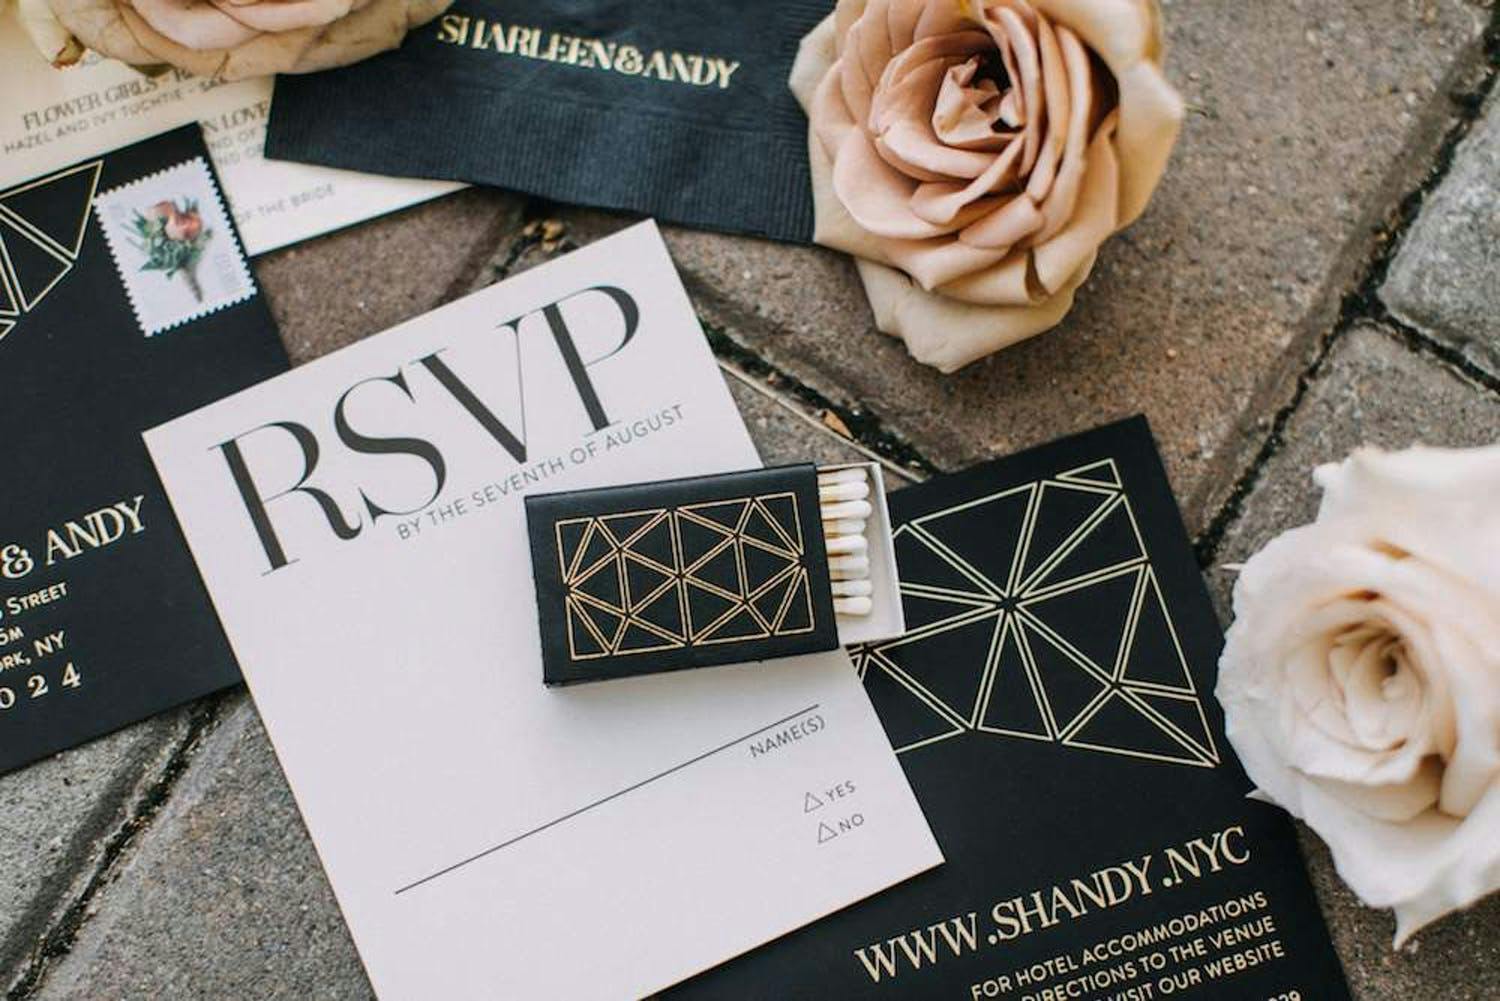 12 Black and White Wedding Ideas for a Stunning Celebration - PartySlate